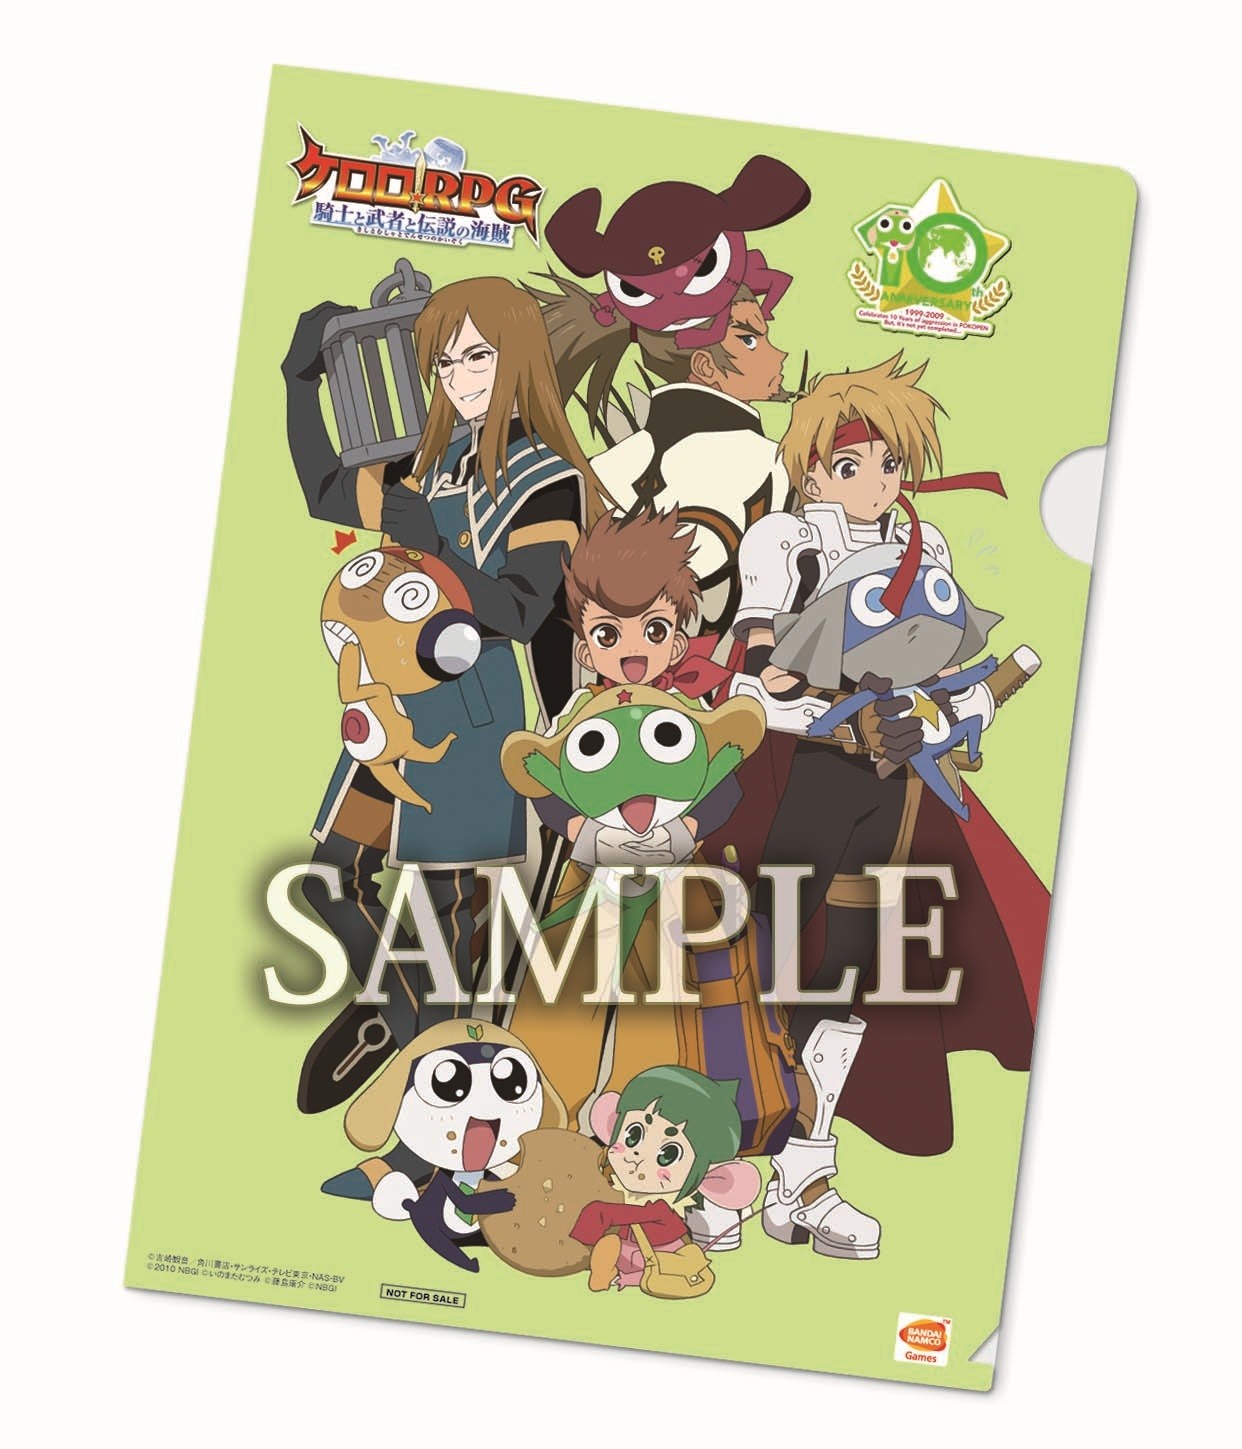 Keroro RPG x Tales of Collaboration
